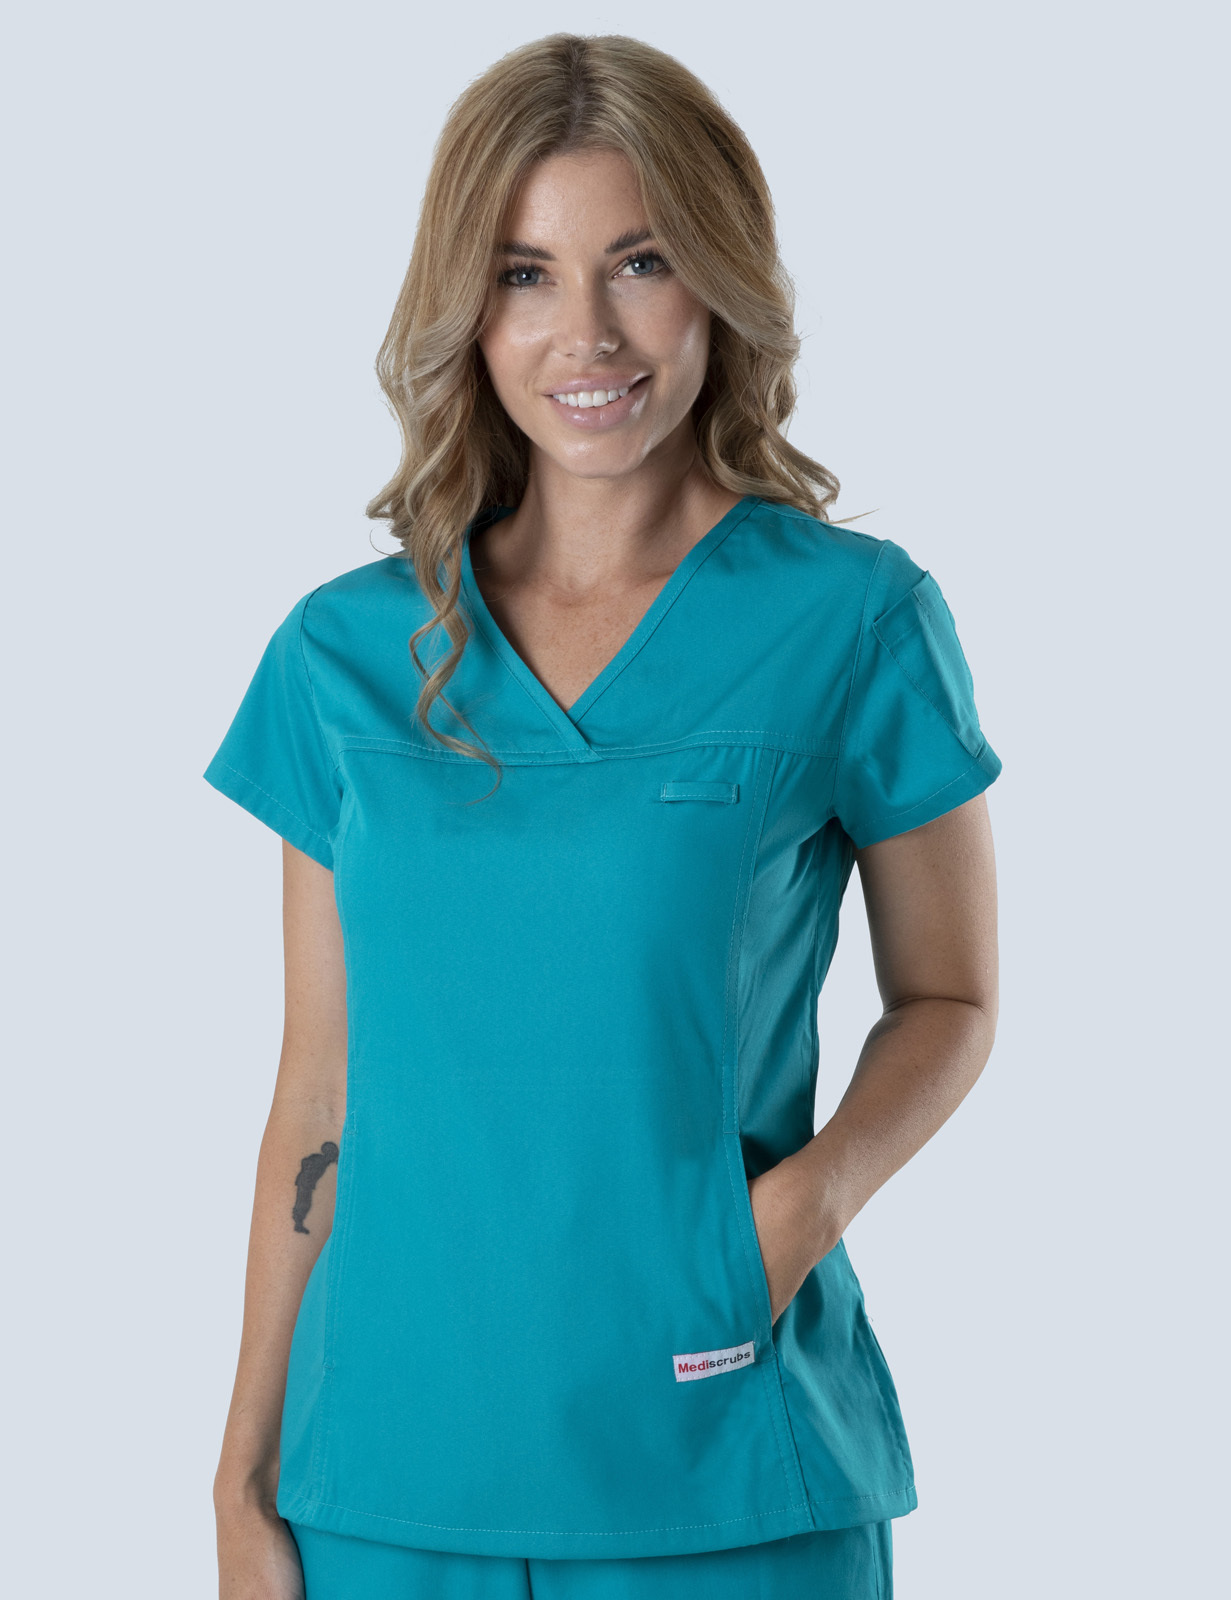 Dental Assistants - Women's Fit Solid Scrub Top in Teal